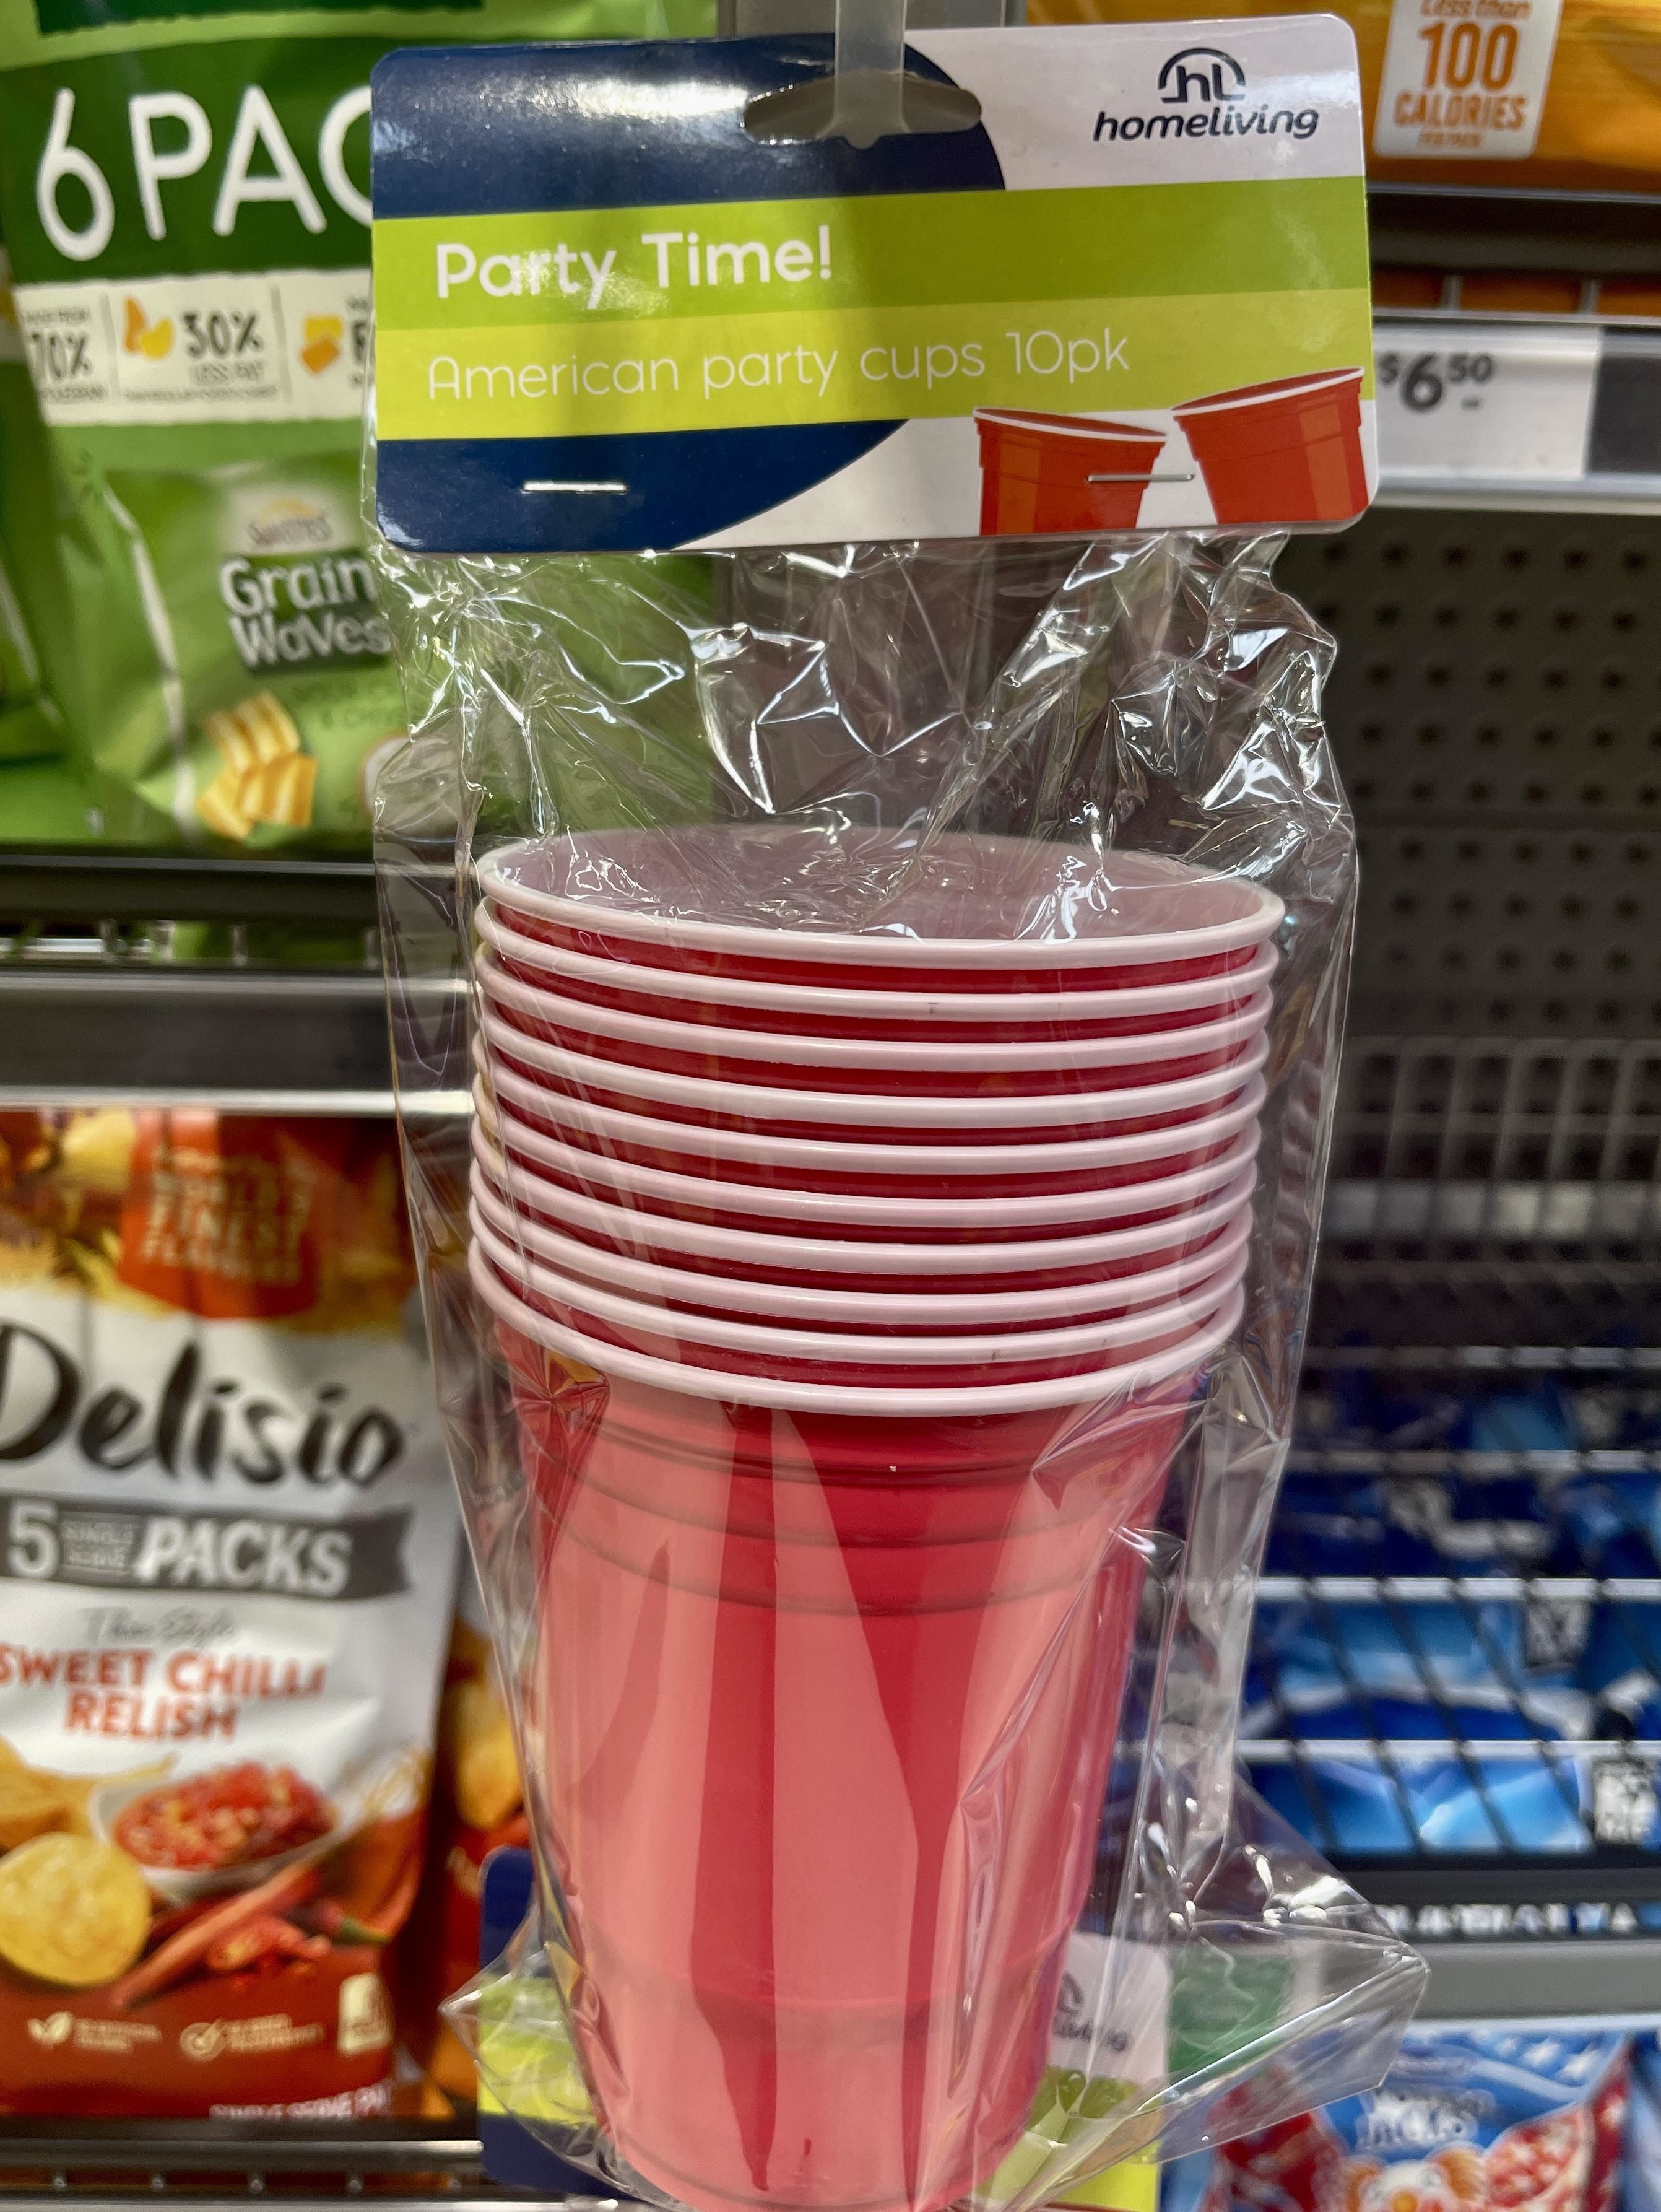 American party cups